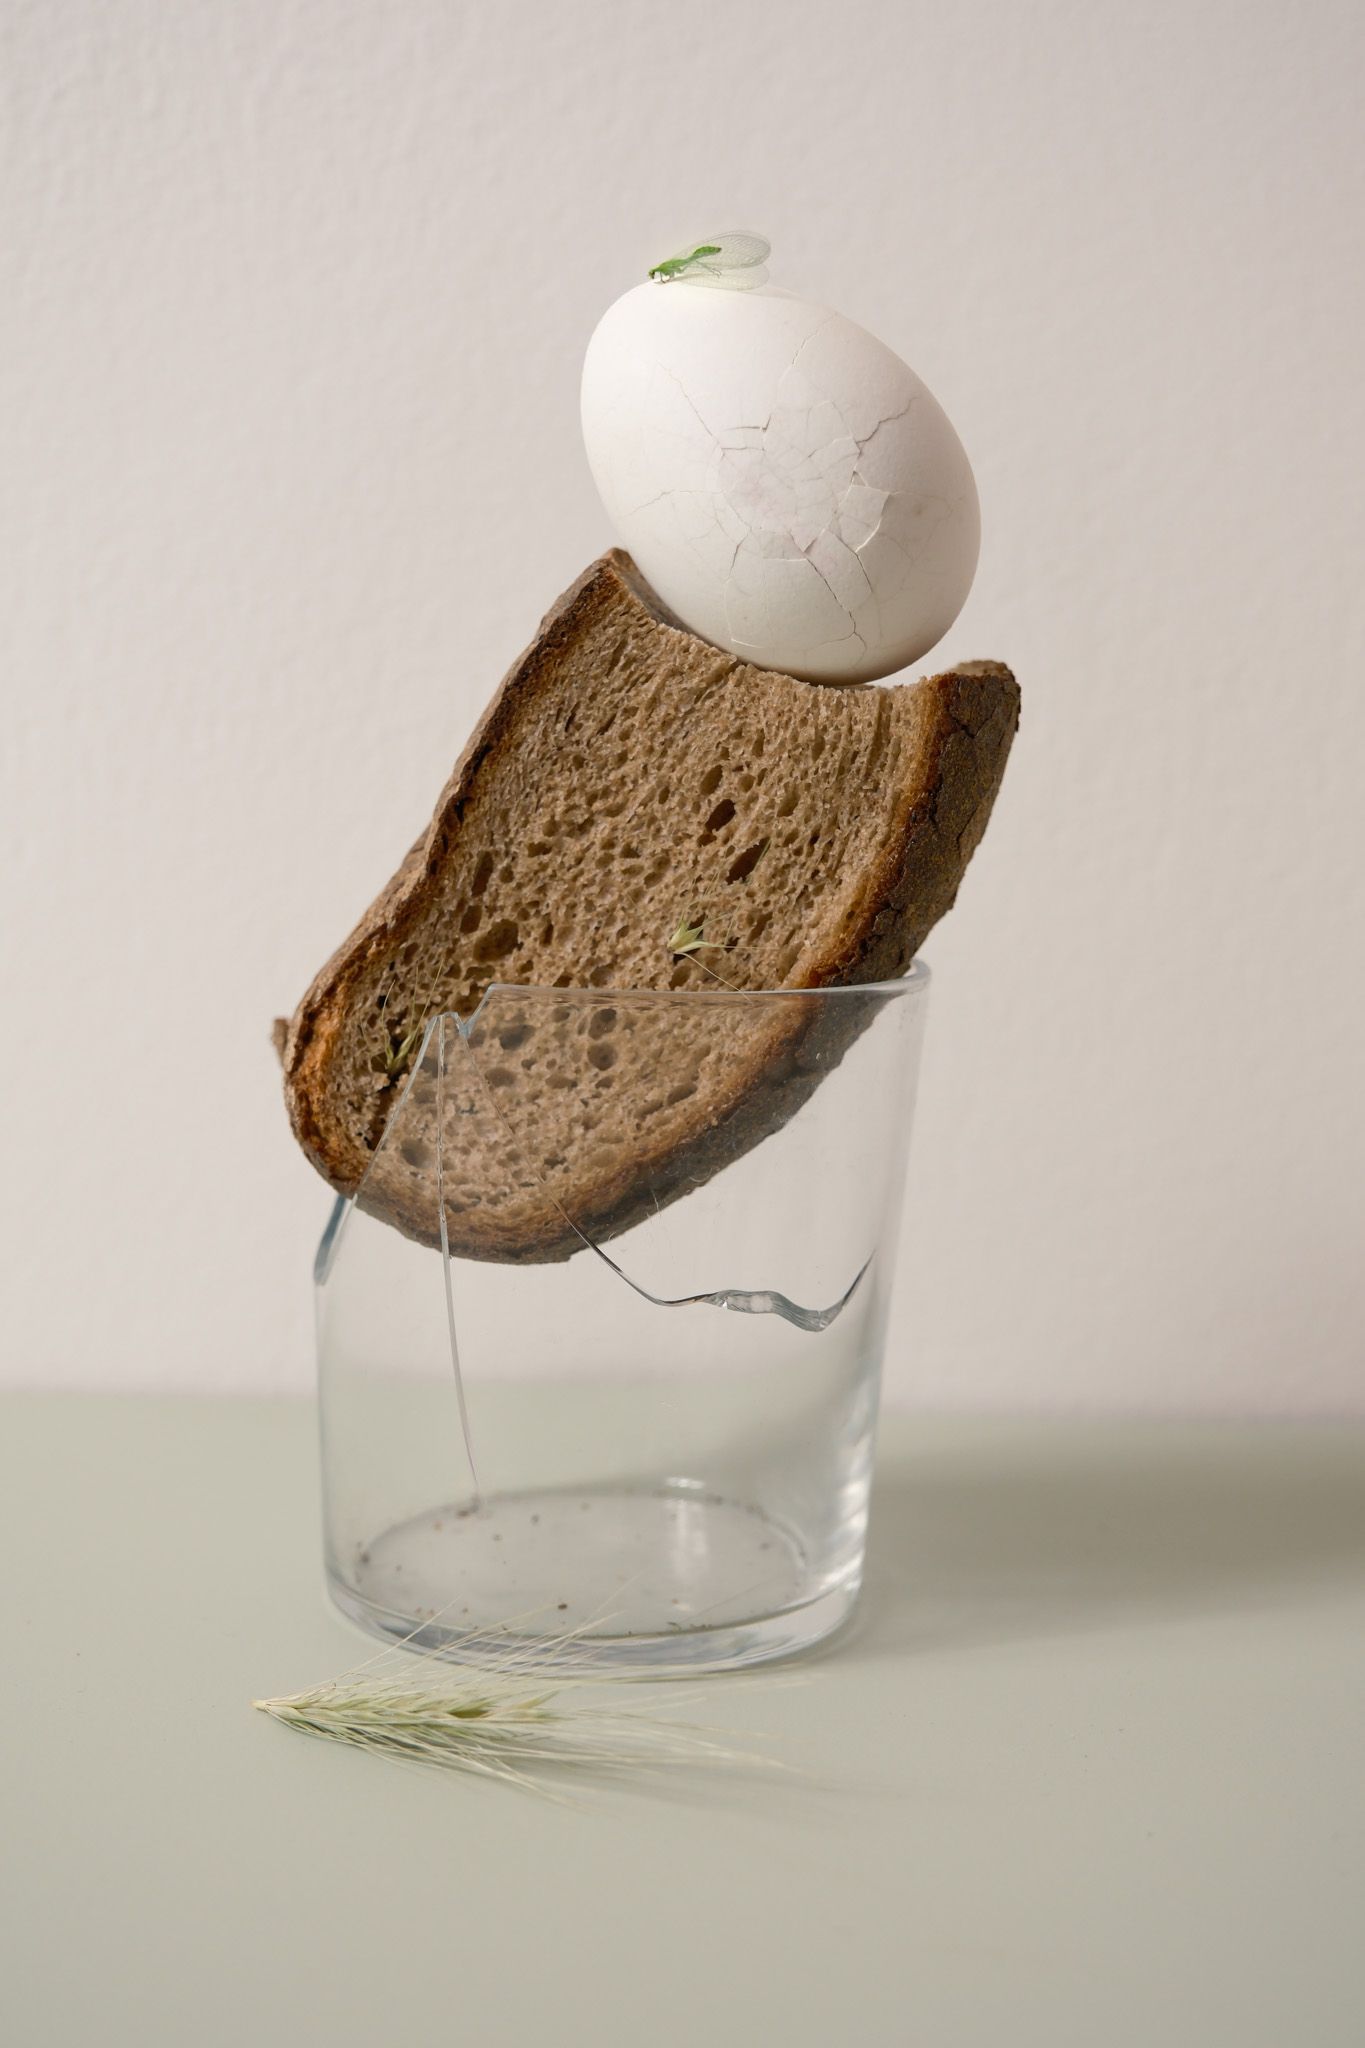 Broken glass based bread topped with a crumbly egg and grasshopper